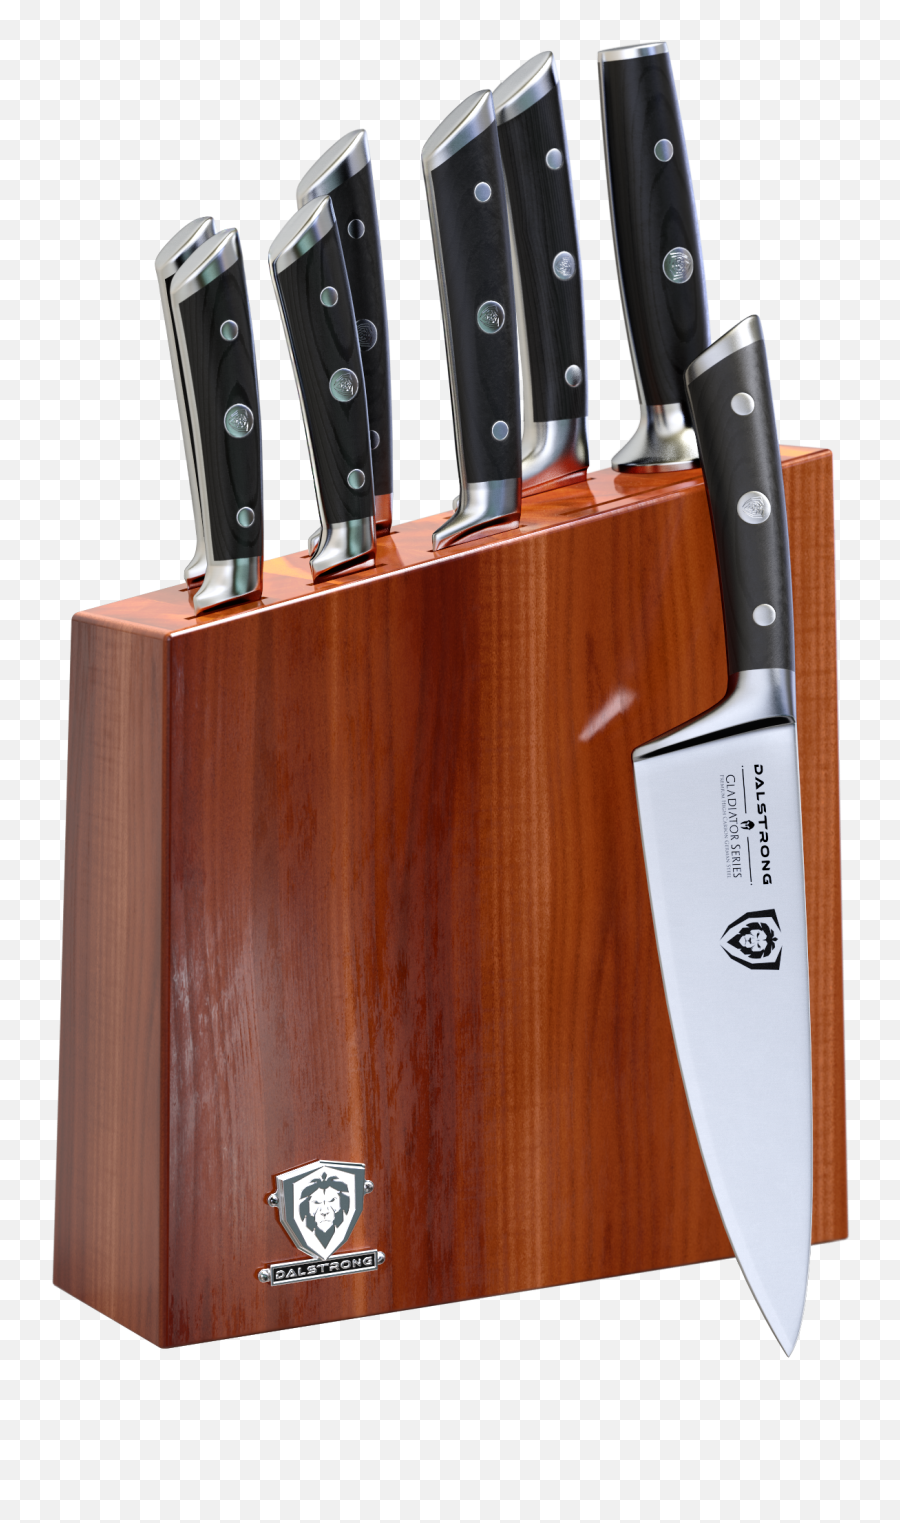 Chef Knife Png - Oou Kitchen Knife Set Amazon,Chef Knife Png